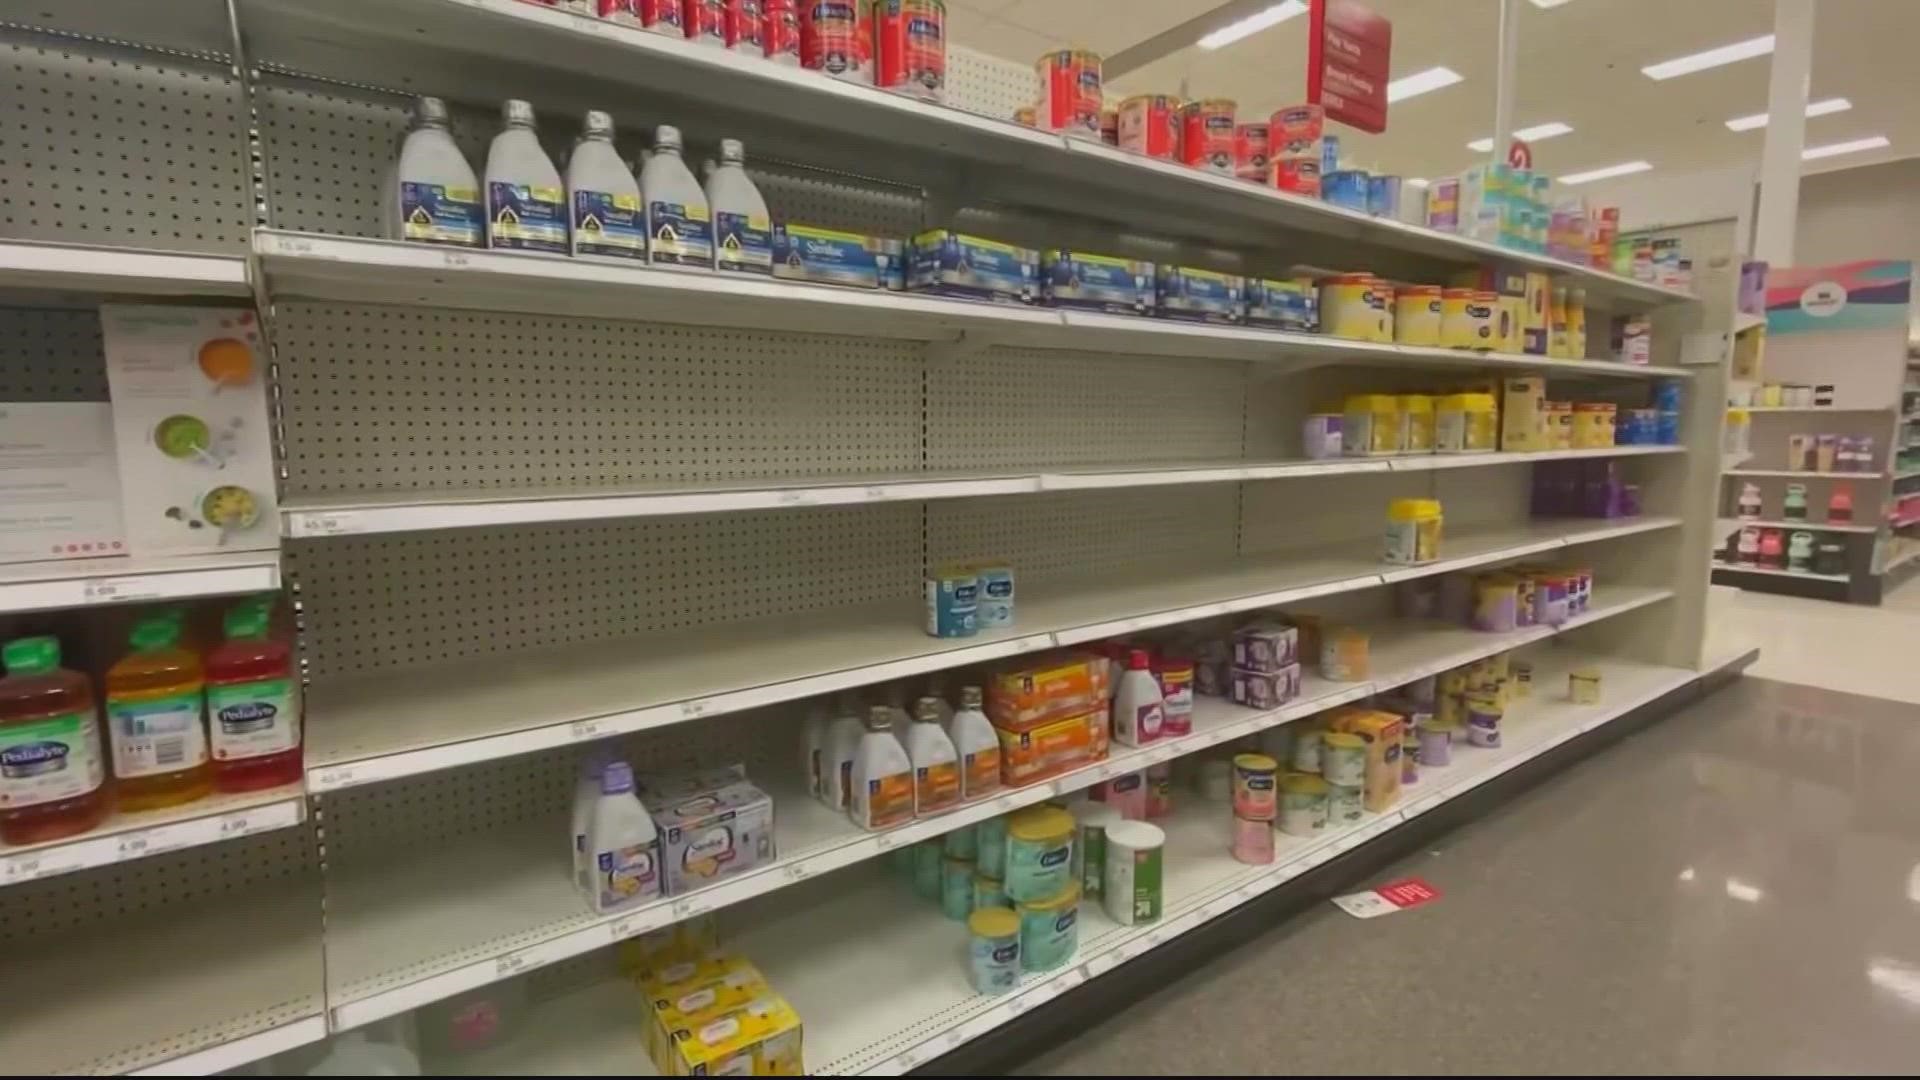 Many families are struggling to find baby formula in the midst of a national shortage caused by massive safety recall and supply disruptions.